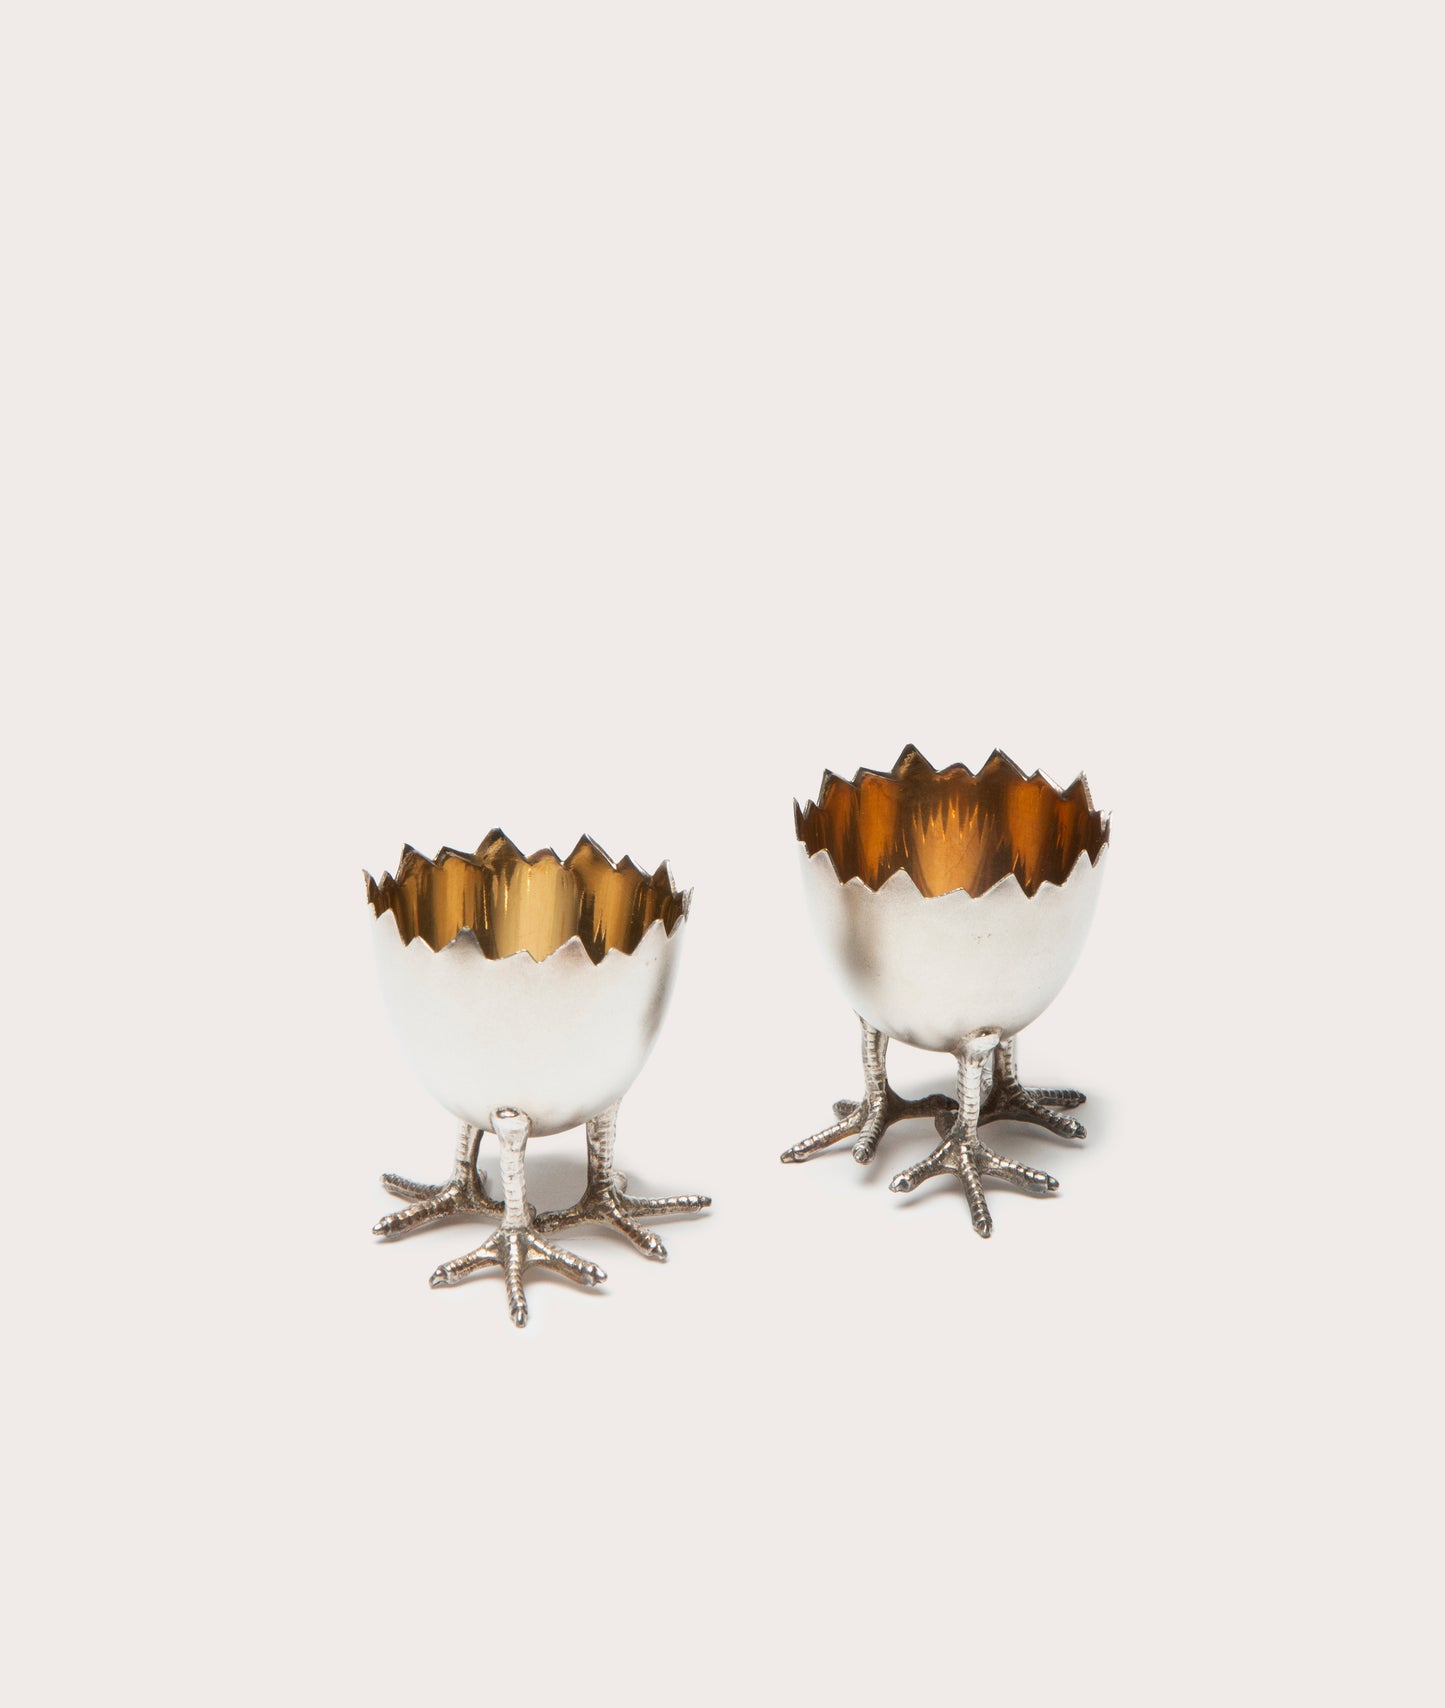 Silver Egg Cups with Chicken Feet